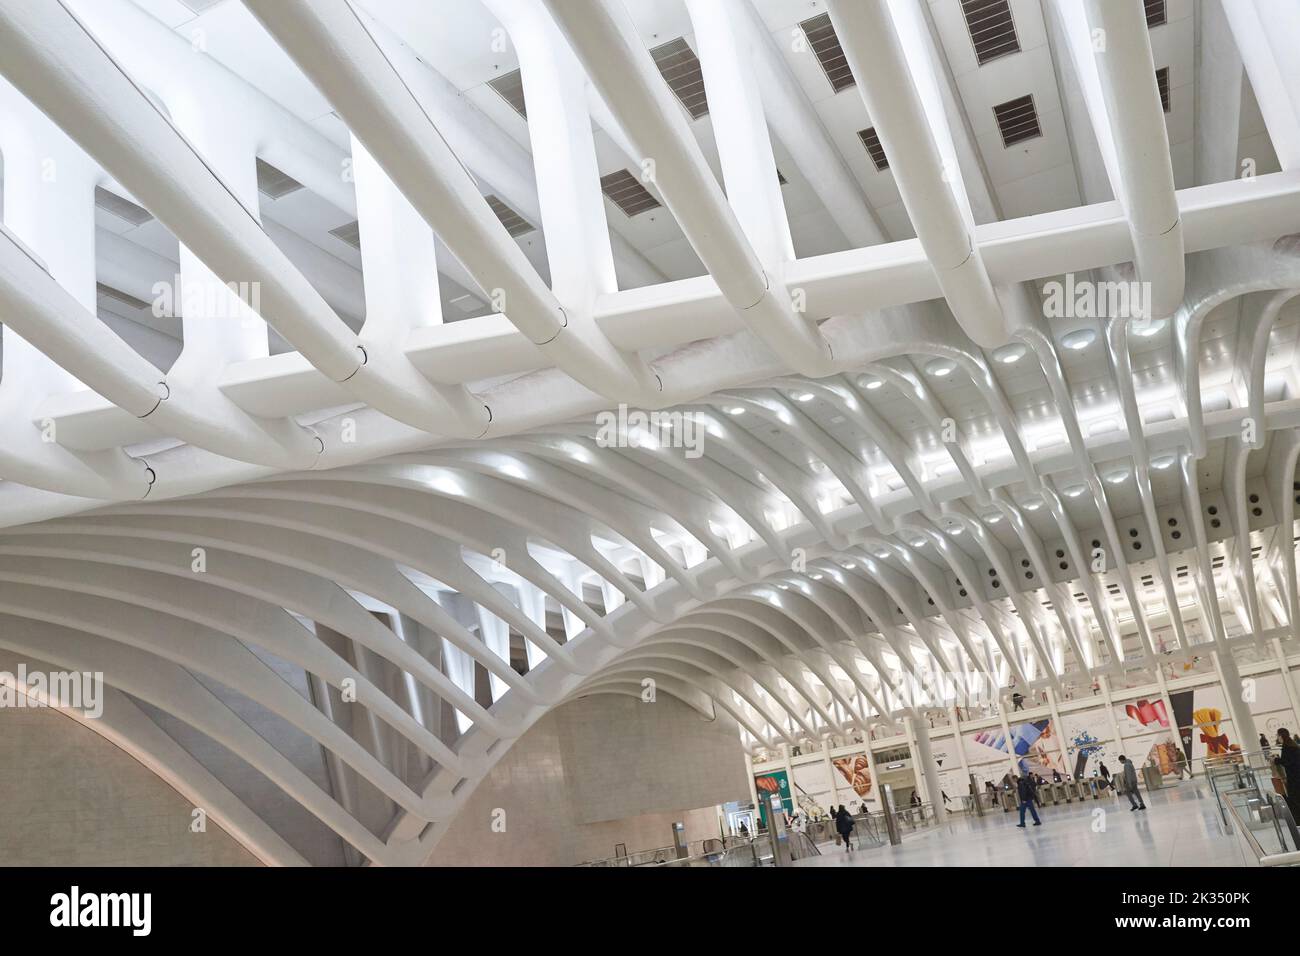 Detail of the bones or spine in the interior of the Oculus at The World Trade Center in Manhattan, NYC Stock Photo